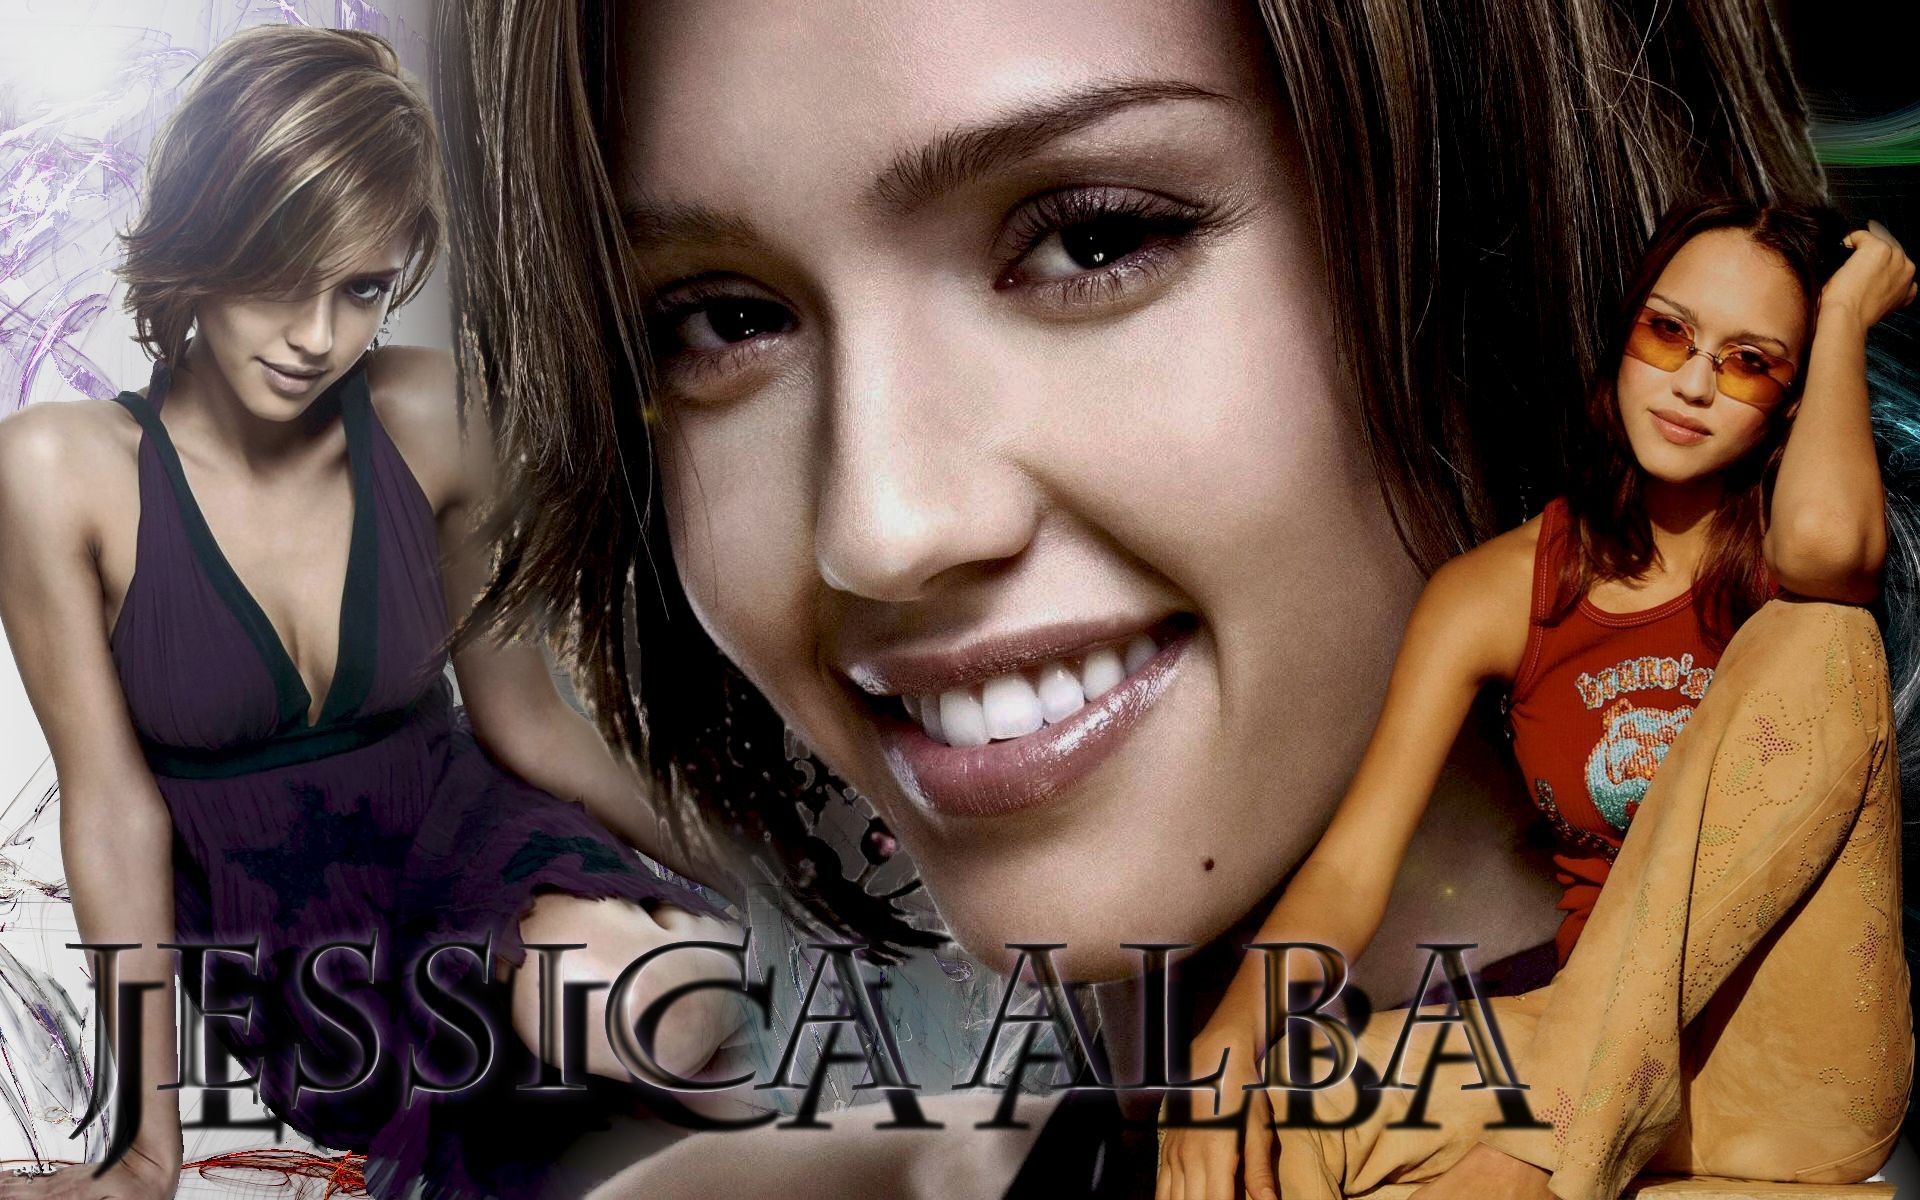 Jessica Alba smiling radiantly against a vibrant background.